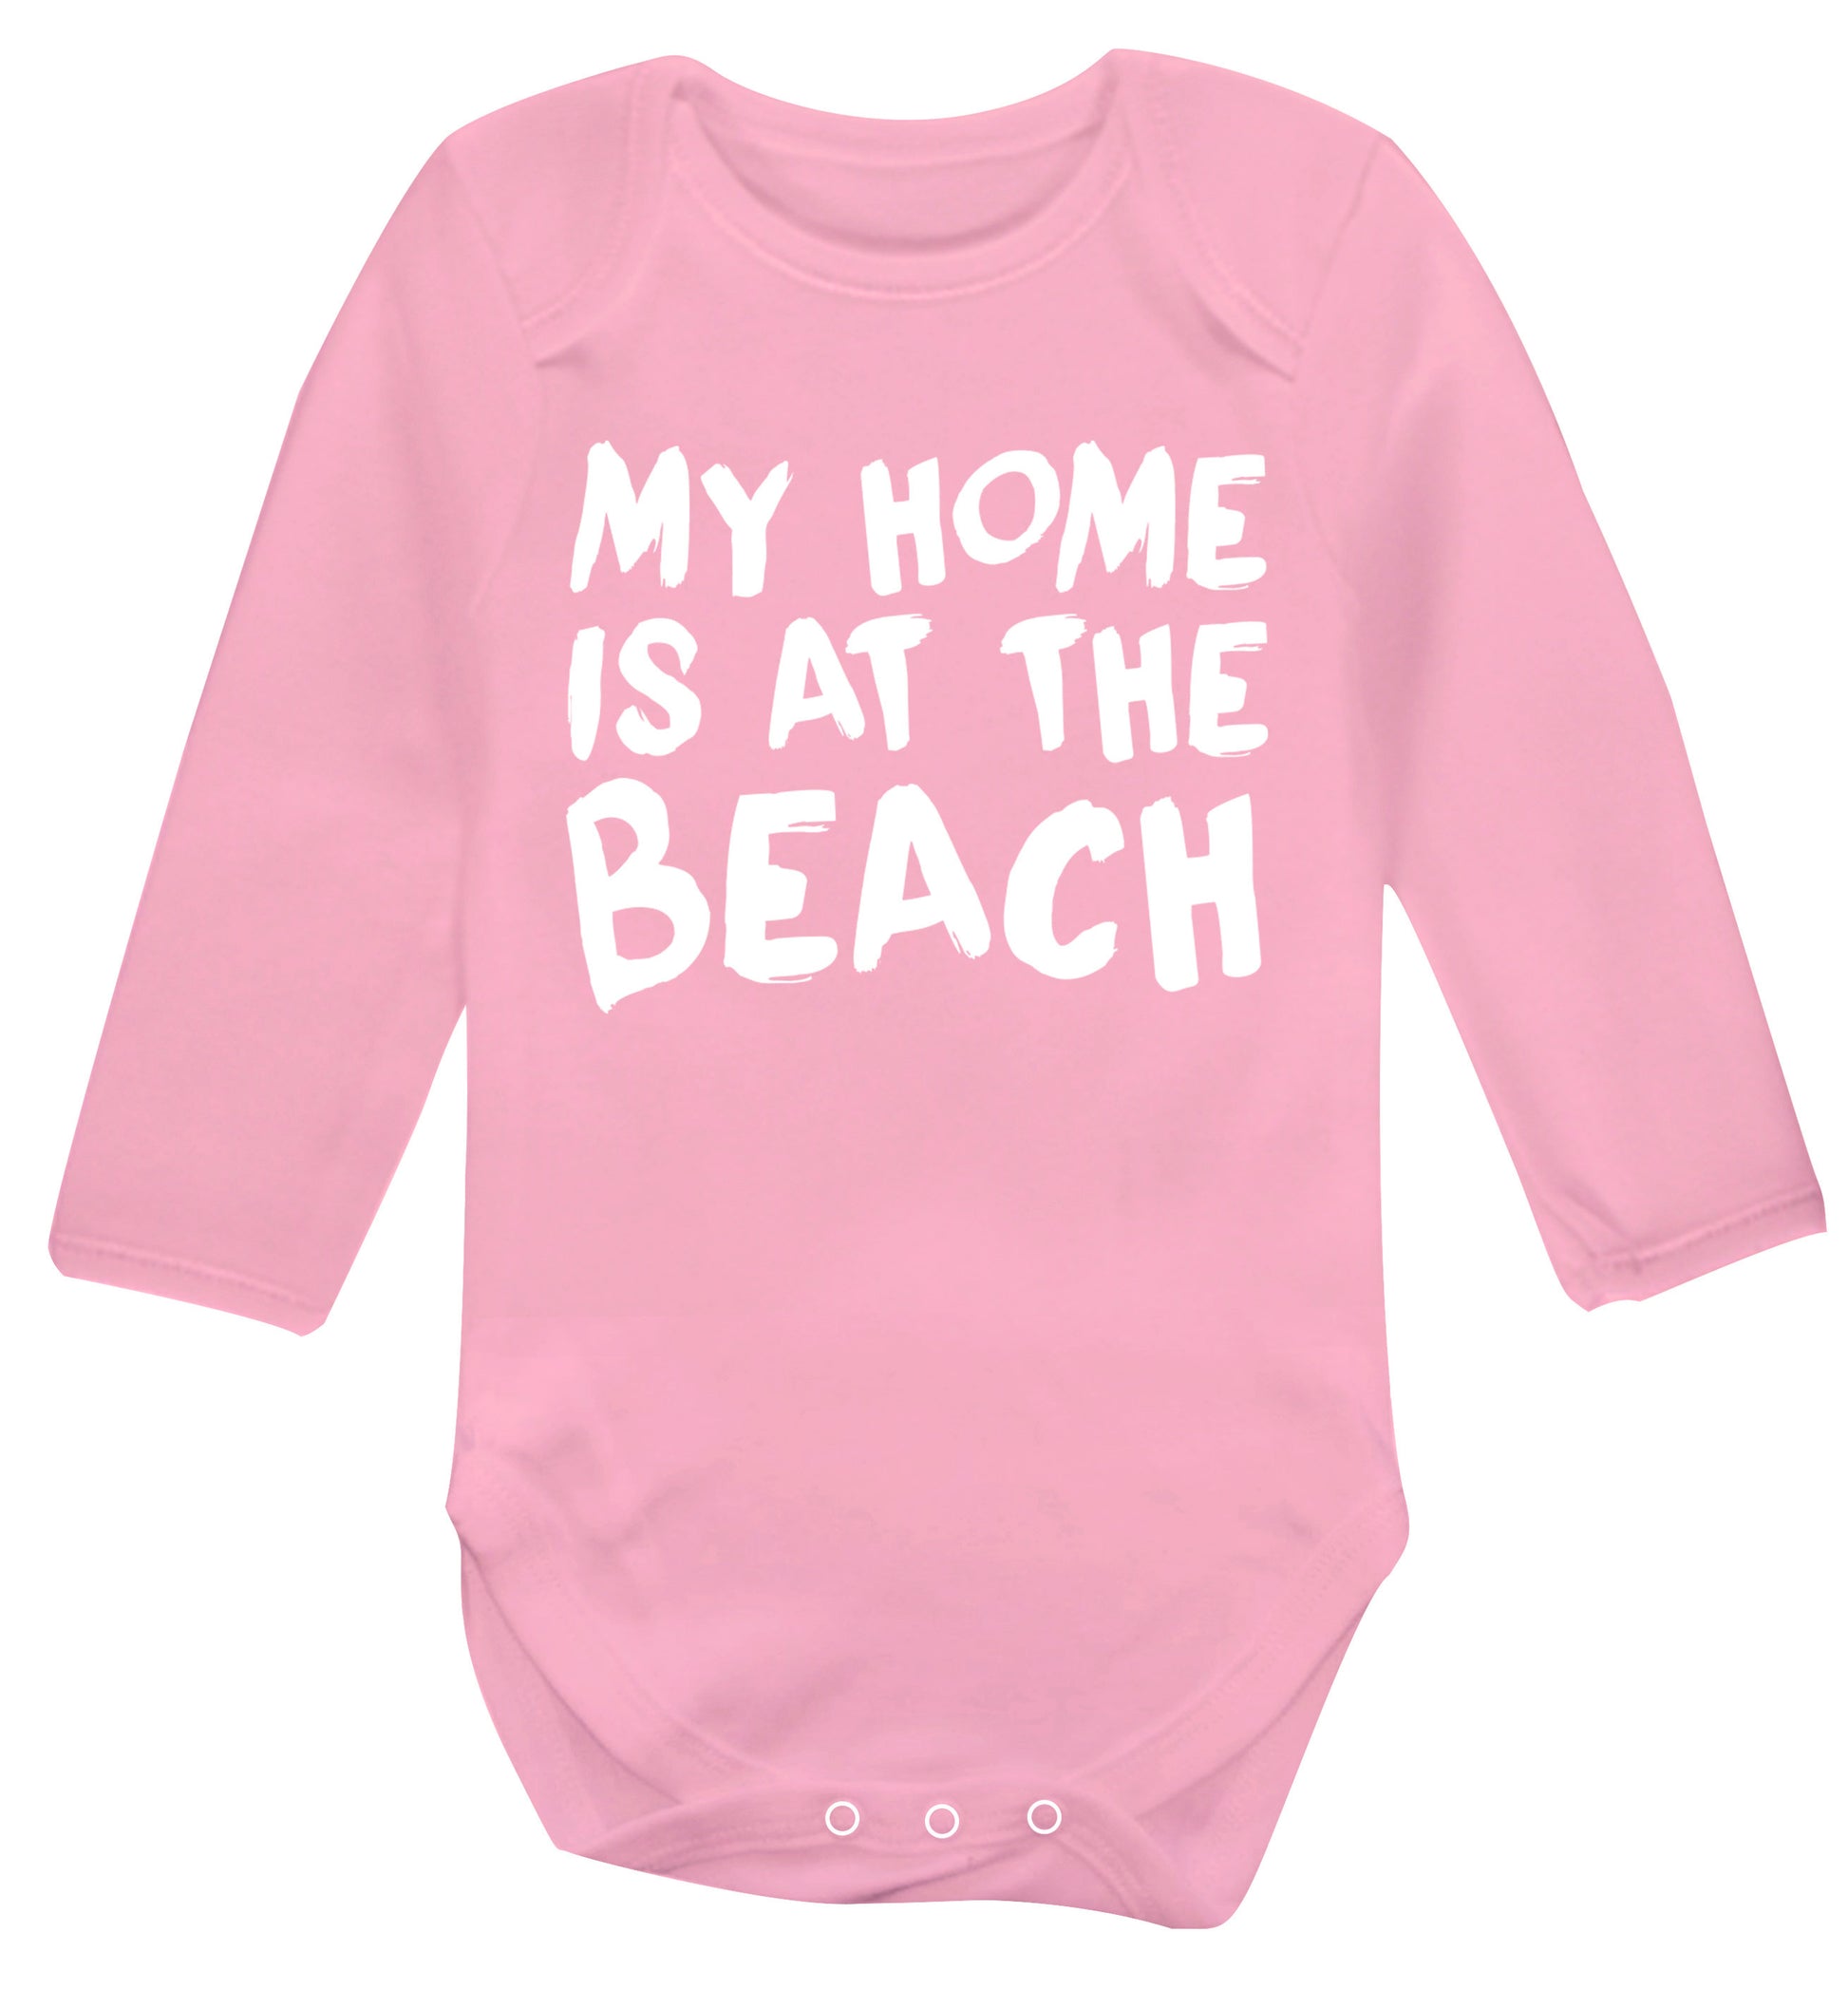 My home is at the beach Baby Vest long sleeved pale pink 6-12 months